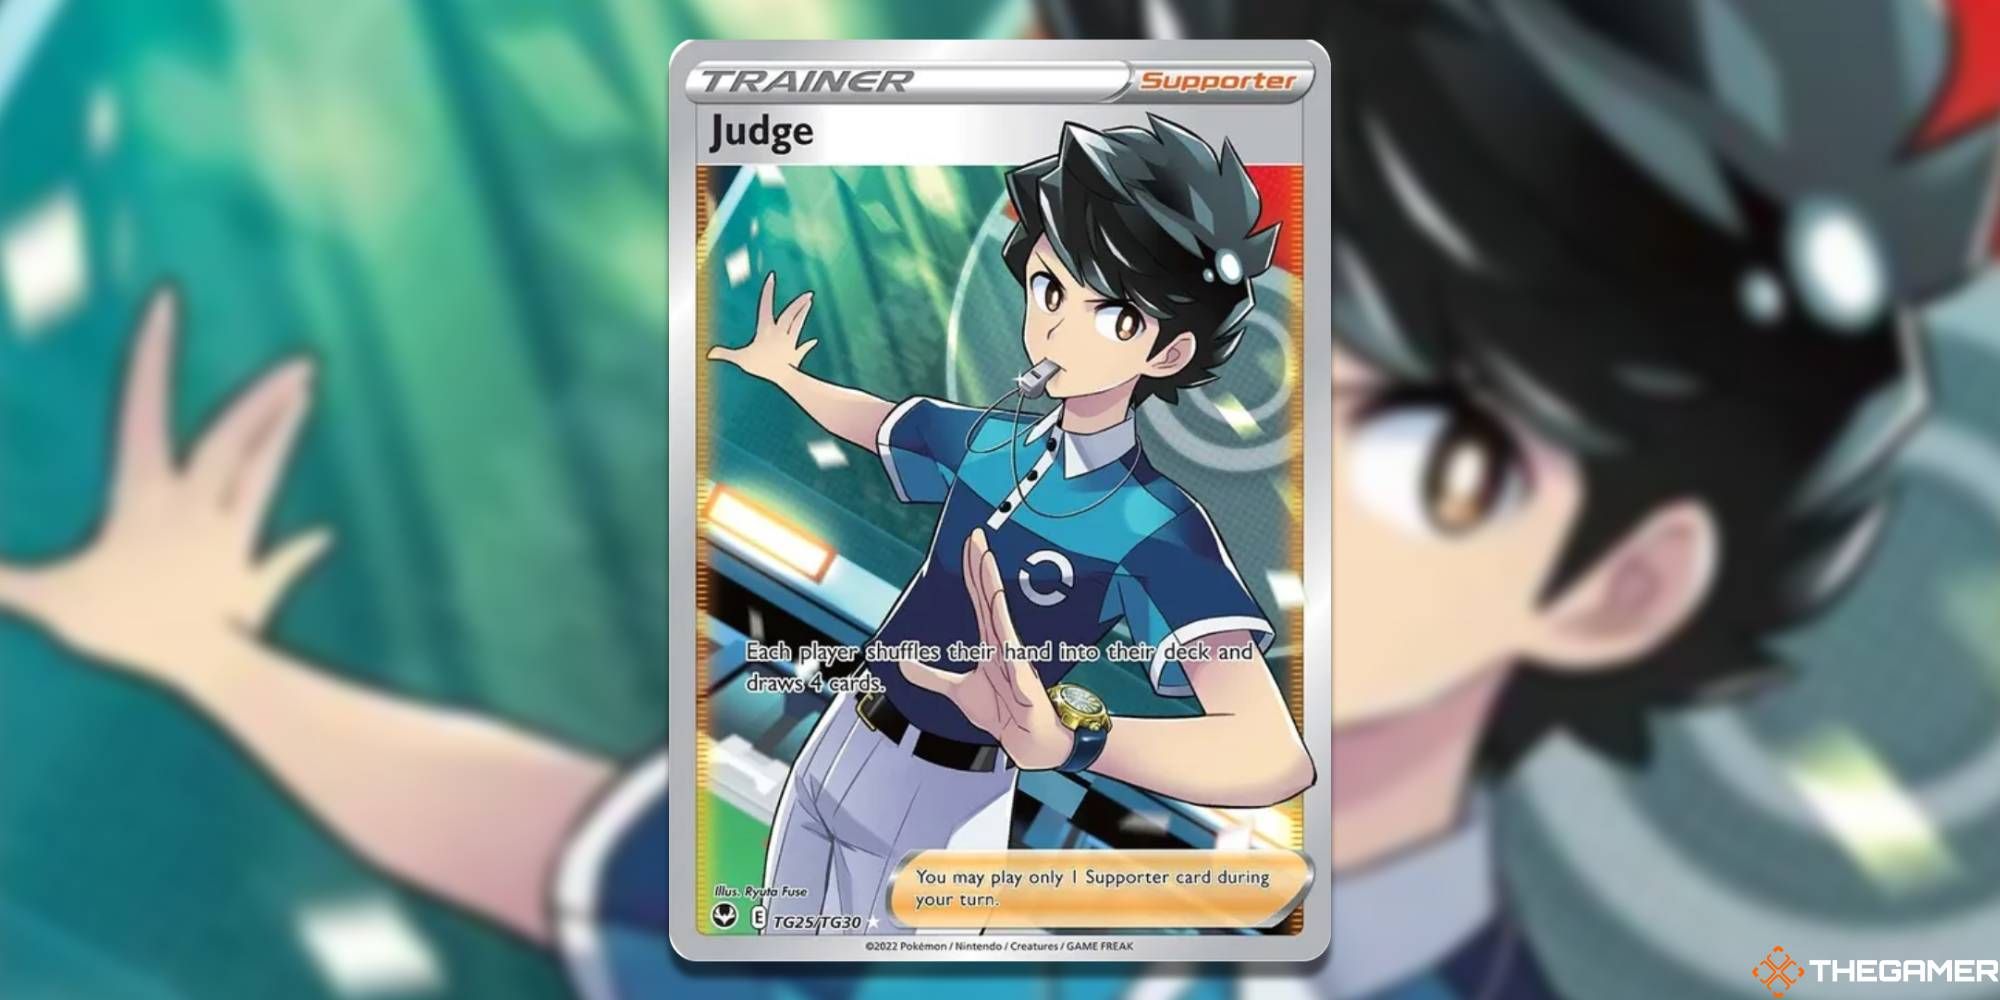 Judge the entire art for Pokemon TCG with blurry backgrounds.